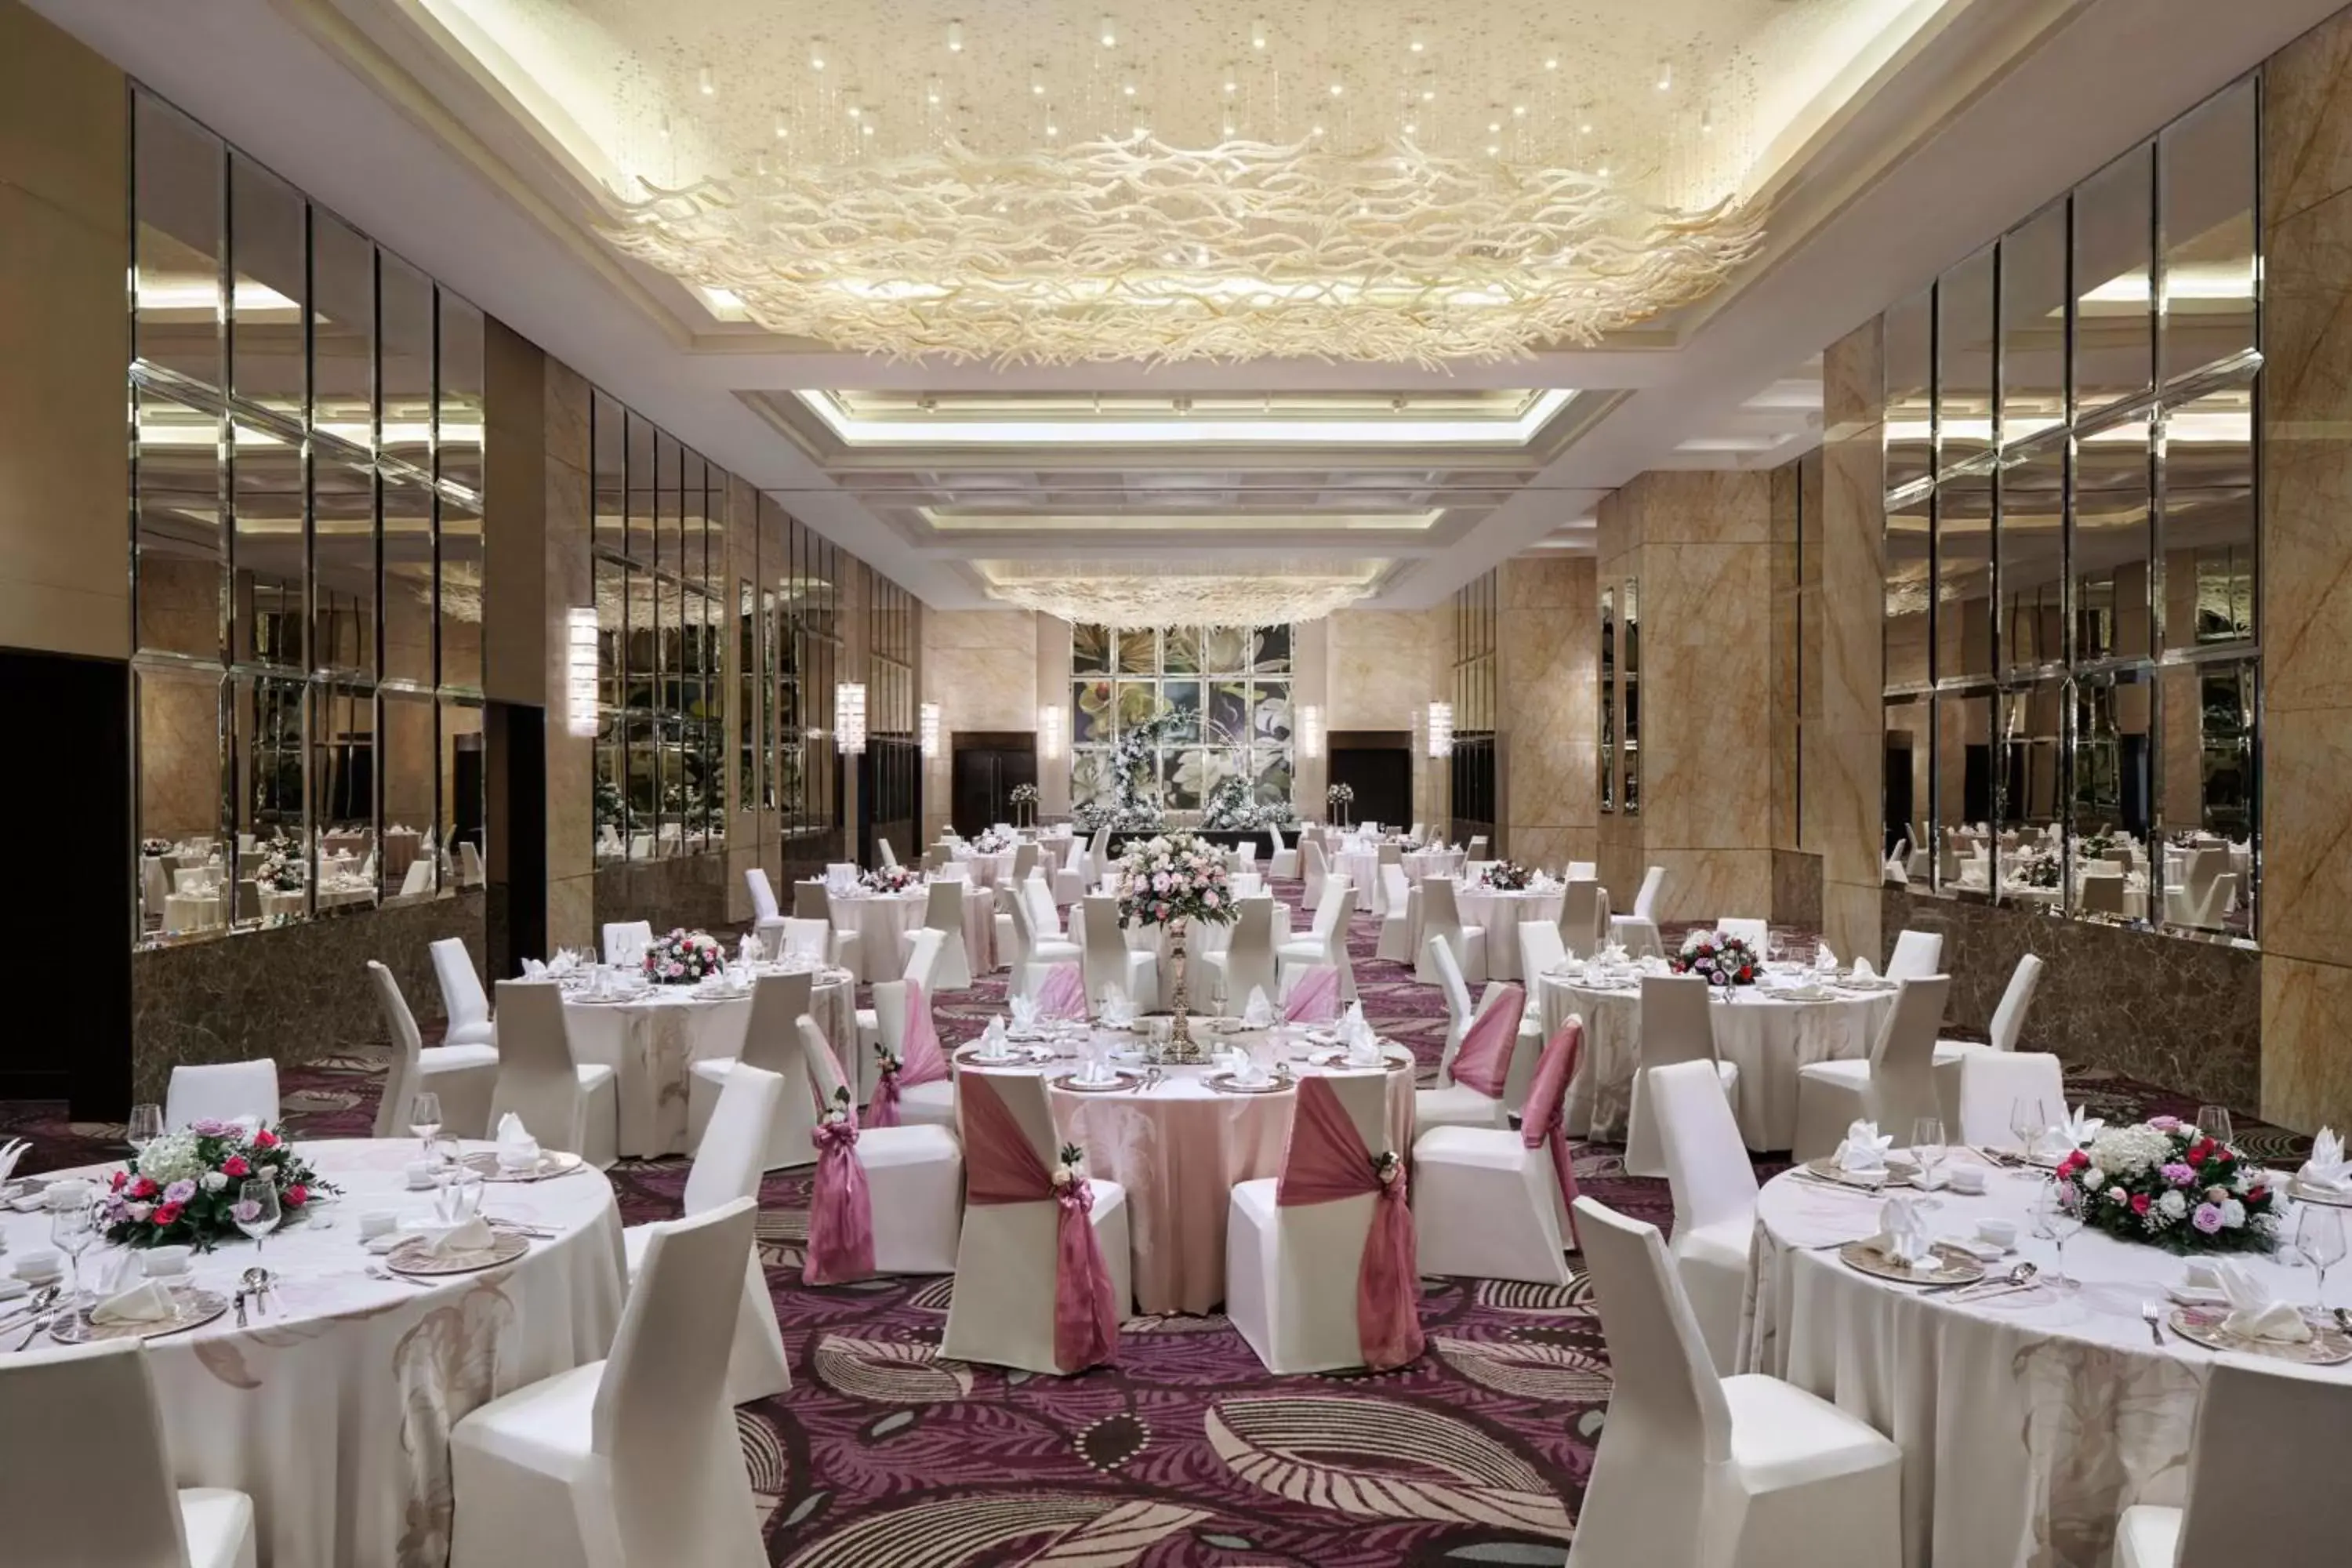 Banquet/Function facilities, Banquet Facilities in The Westin Singapore